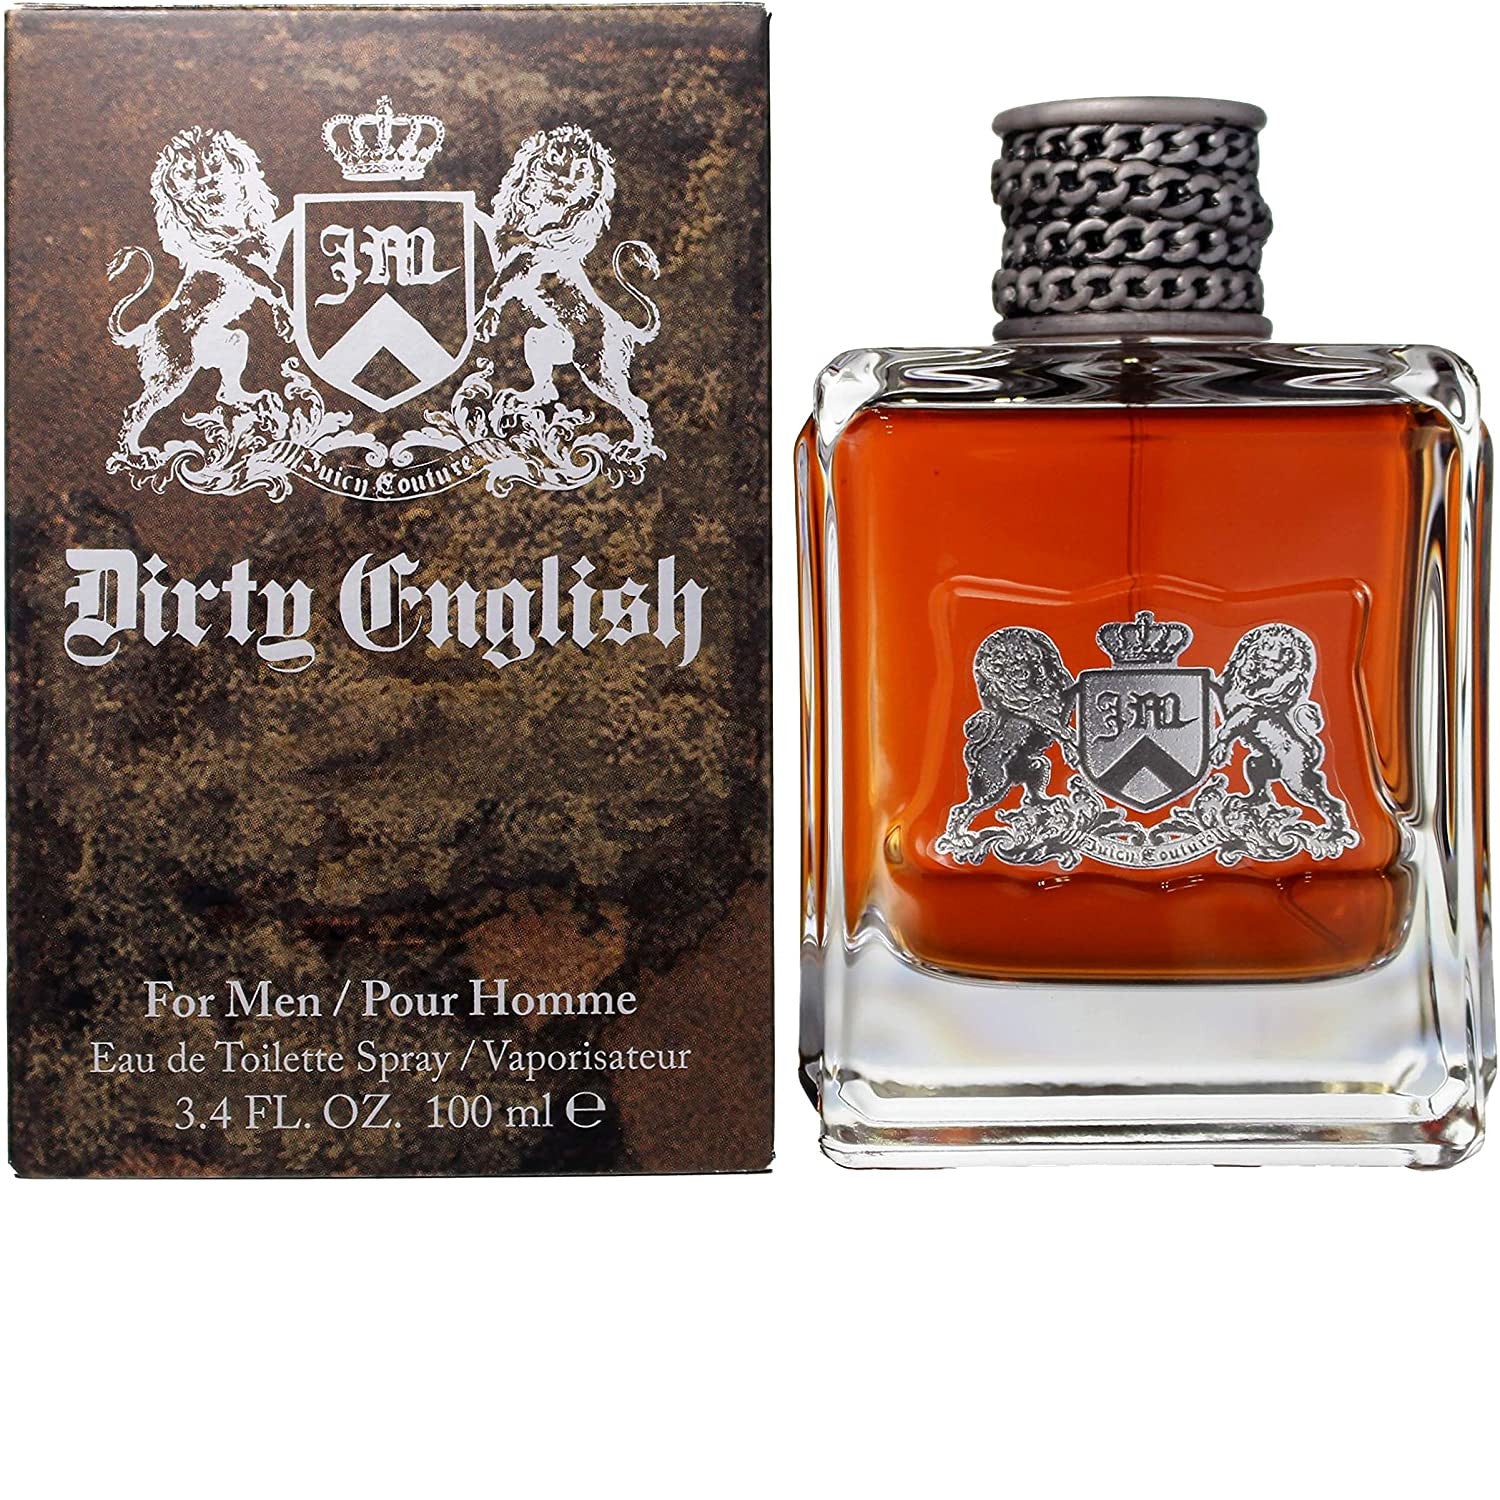 Juicy Couture Juicy Couture Dirty English - perfume for men, Eau de Toillette-100ml - samawa perfumes 